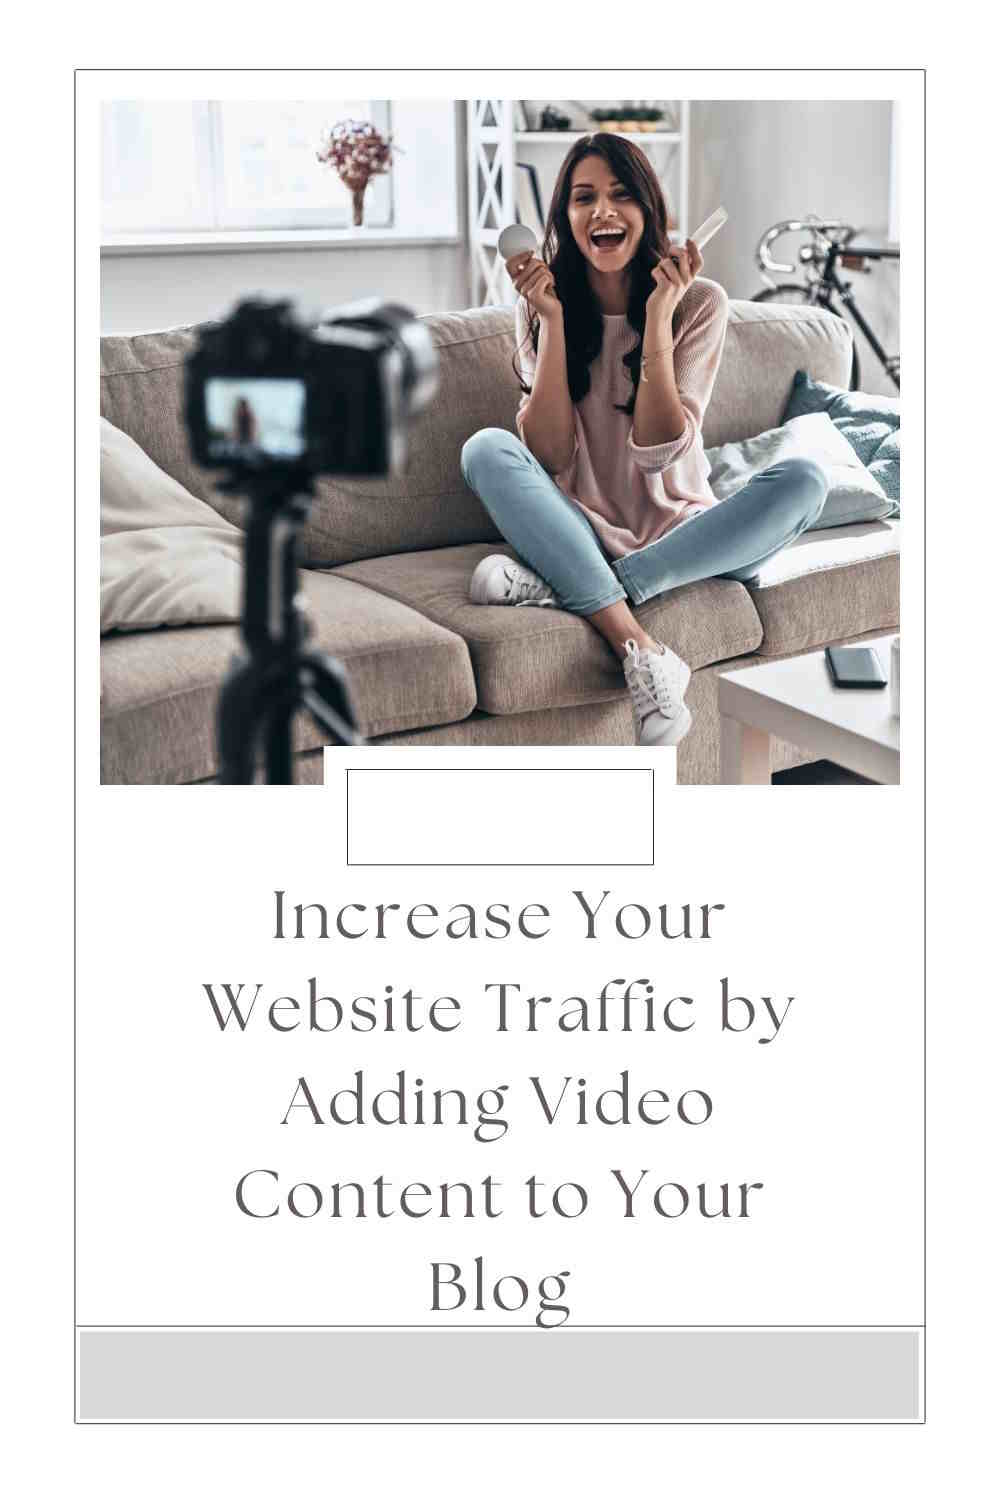 Increase Your Website Traffic by Adding Video Content to Your Blog